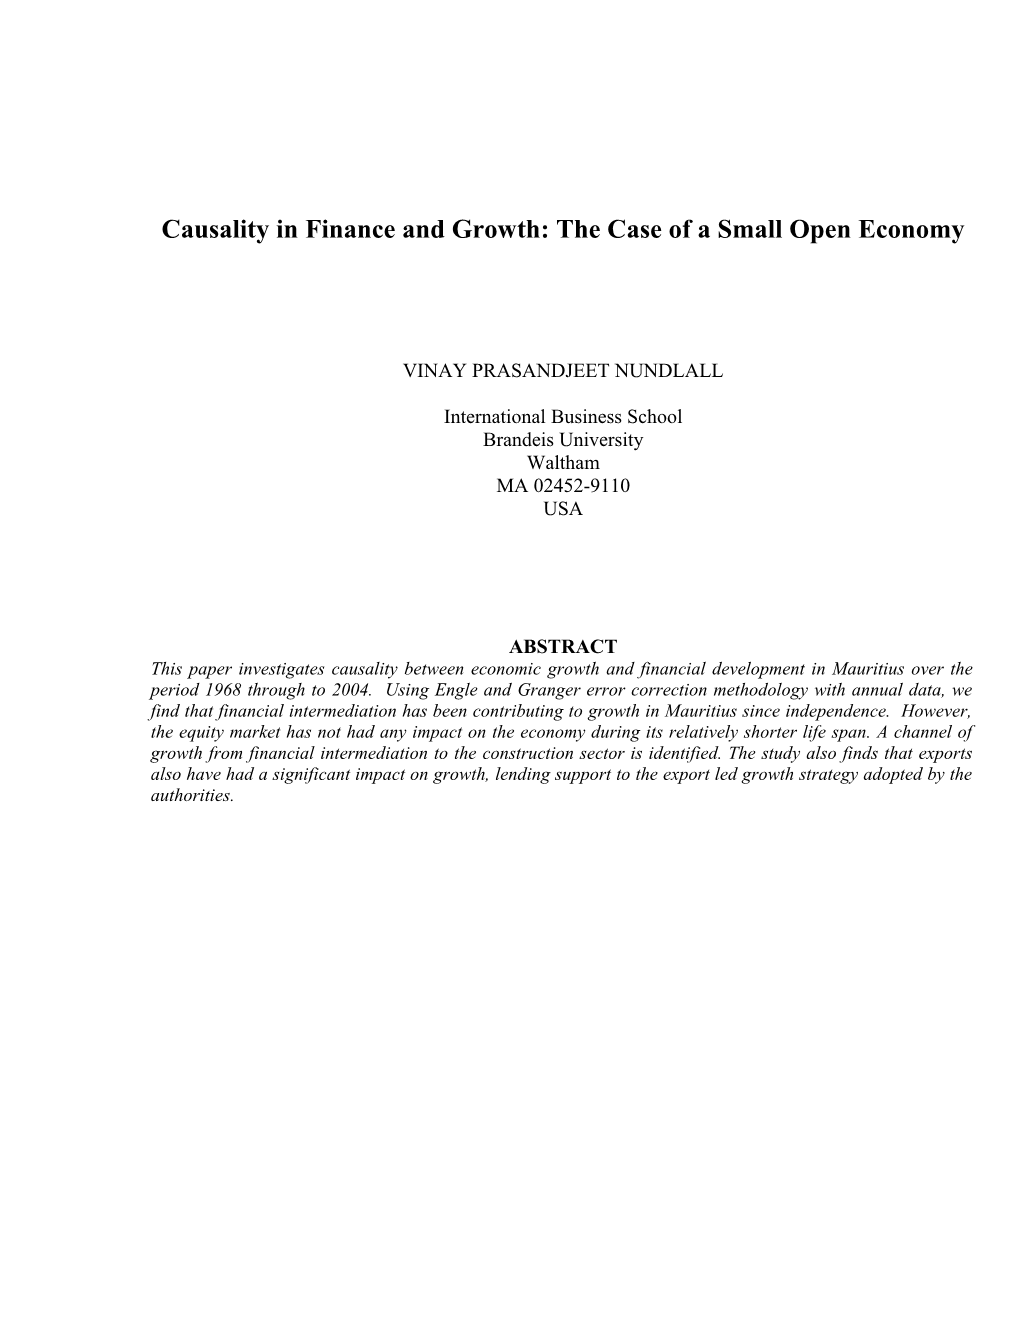 Growth in Mauritius: a Time Series Approach